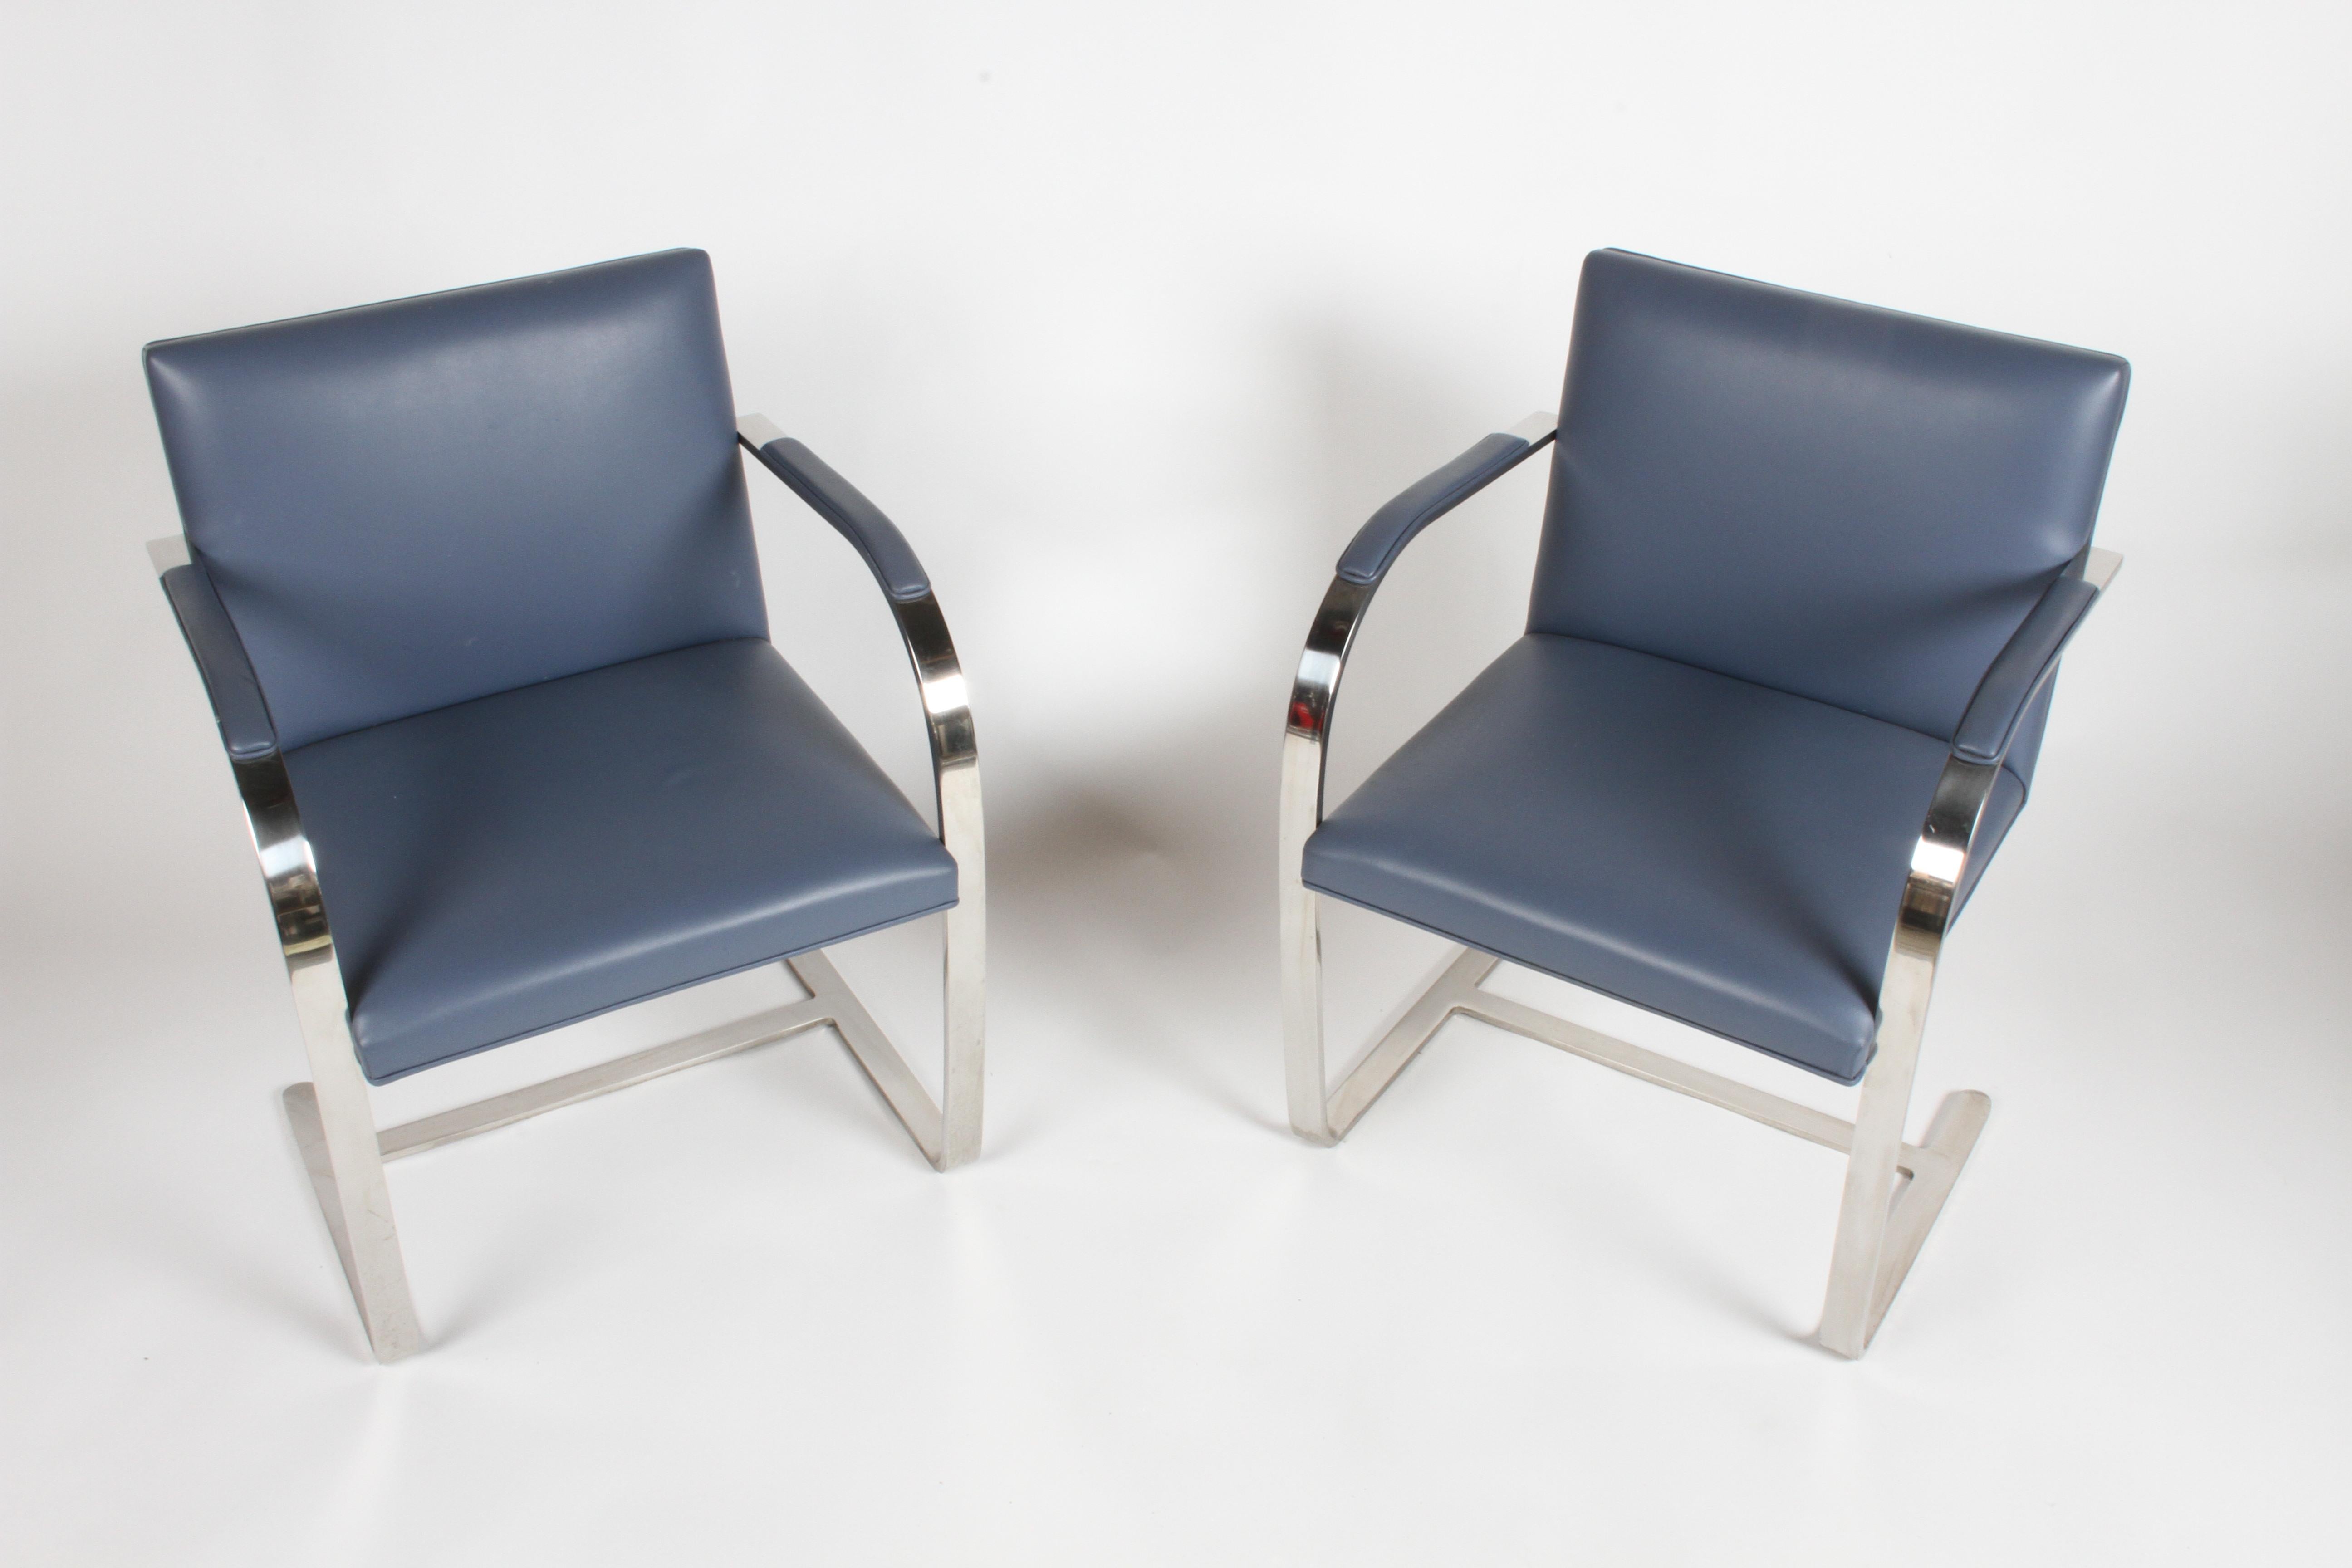 Two Mies van der Rohe flatbar Brno for Knoll in stainless steel with grey blue leather. In excellent condition marked with label. Only minor scuffs to leather see photo. Production year 2000.
(Also have three in black leather, the leather shows